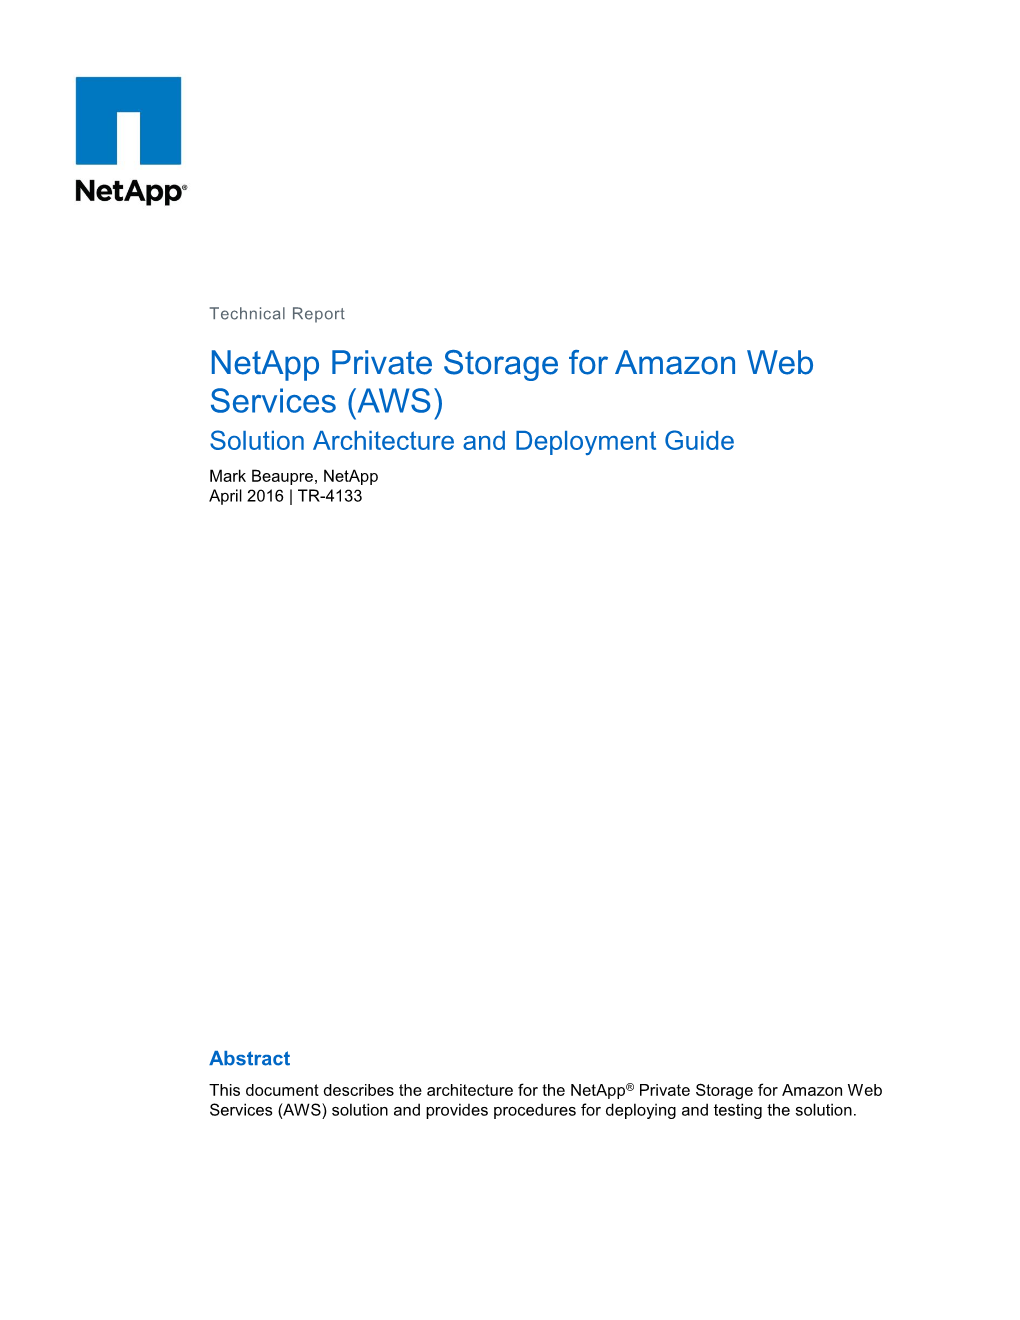 TR-4133: Netapp Private Storage for AWS Solution Architecture And